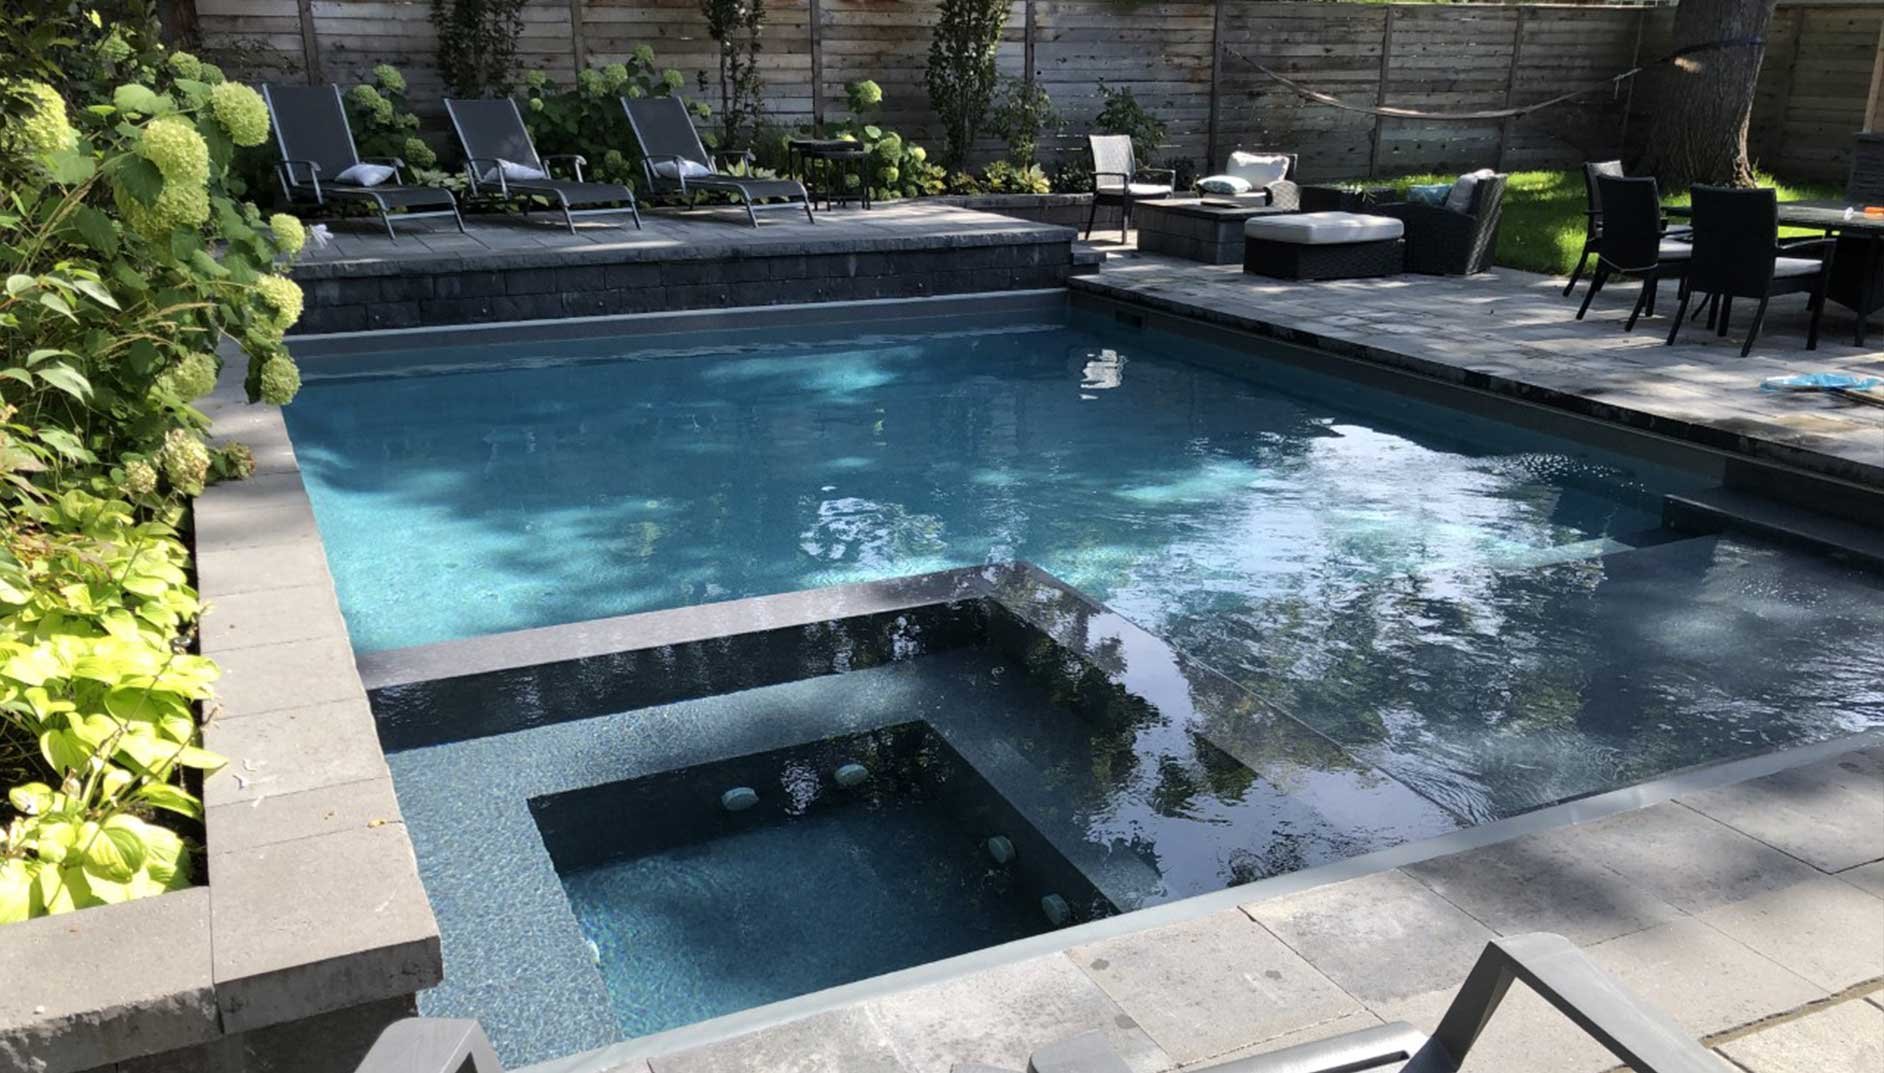 Welcome to G3 Pool & Spa – Your Go-To for Vinyl Pool Services in Toronto